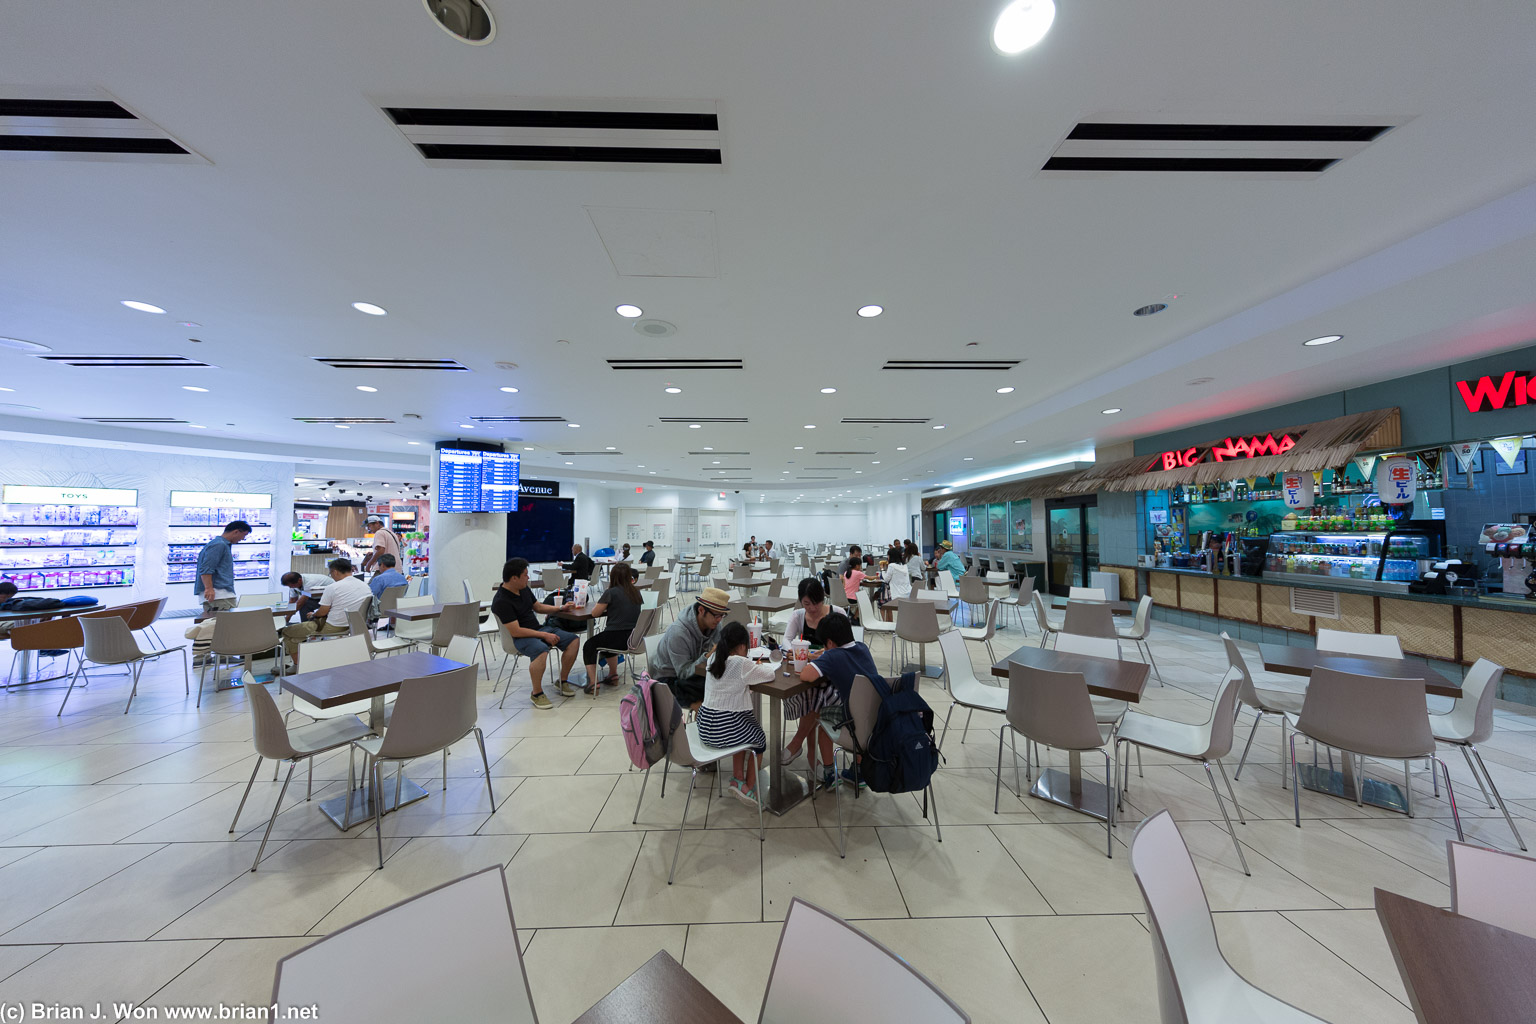 Food court at AB Won Pat Guam International Airport. Yes, that's a Wienerschnitzel to the right.